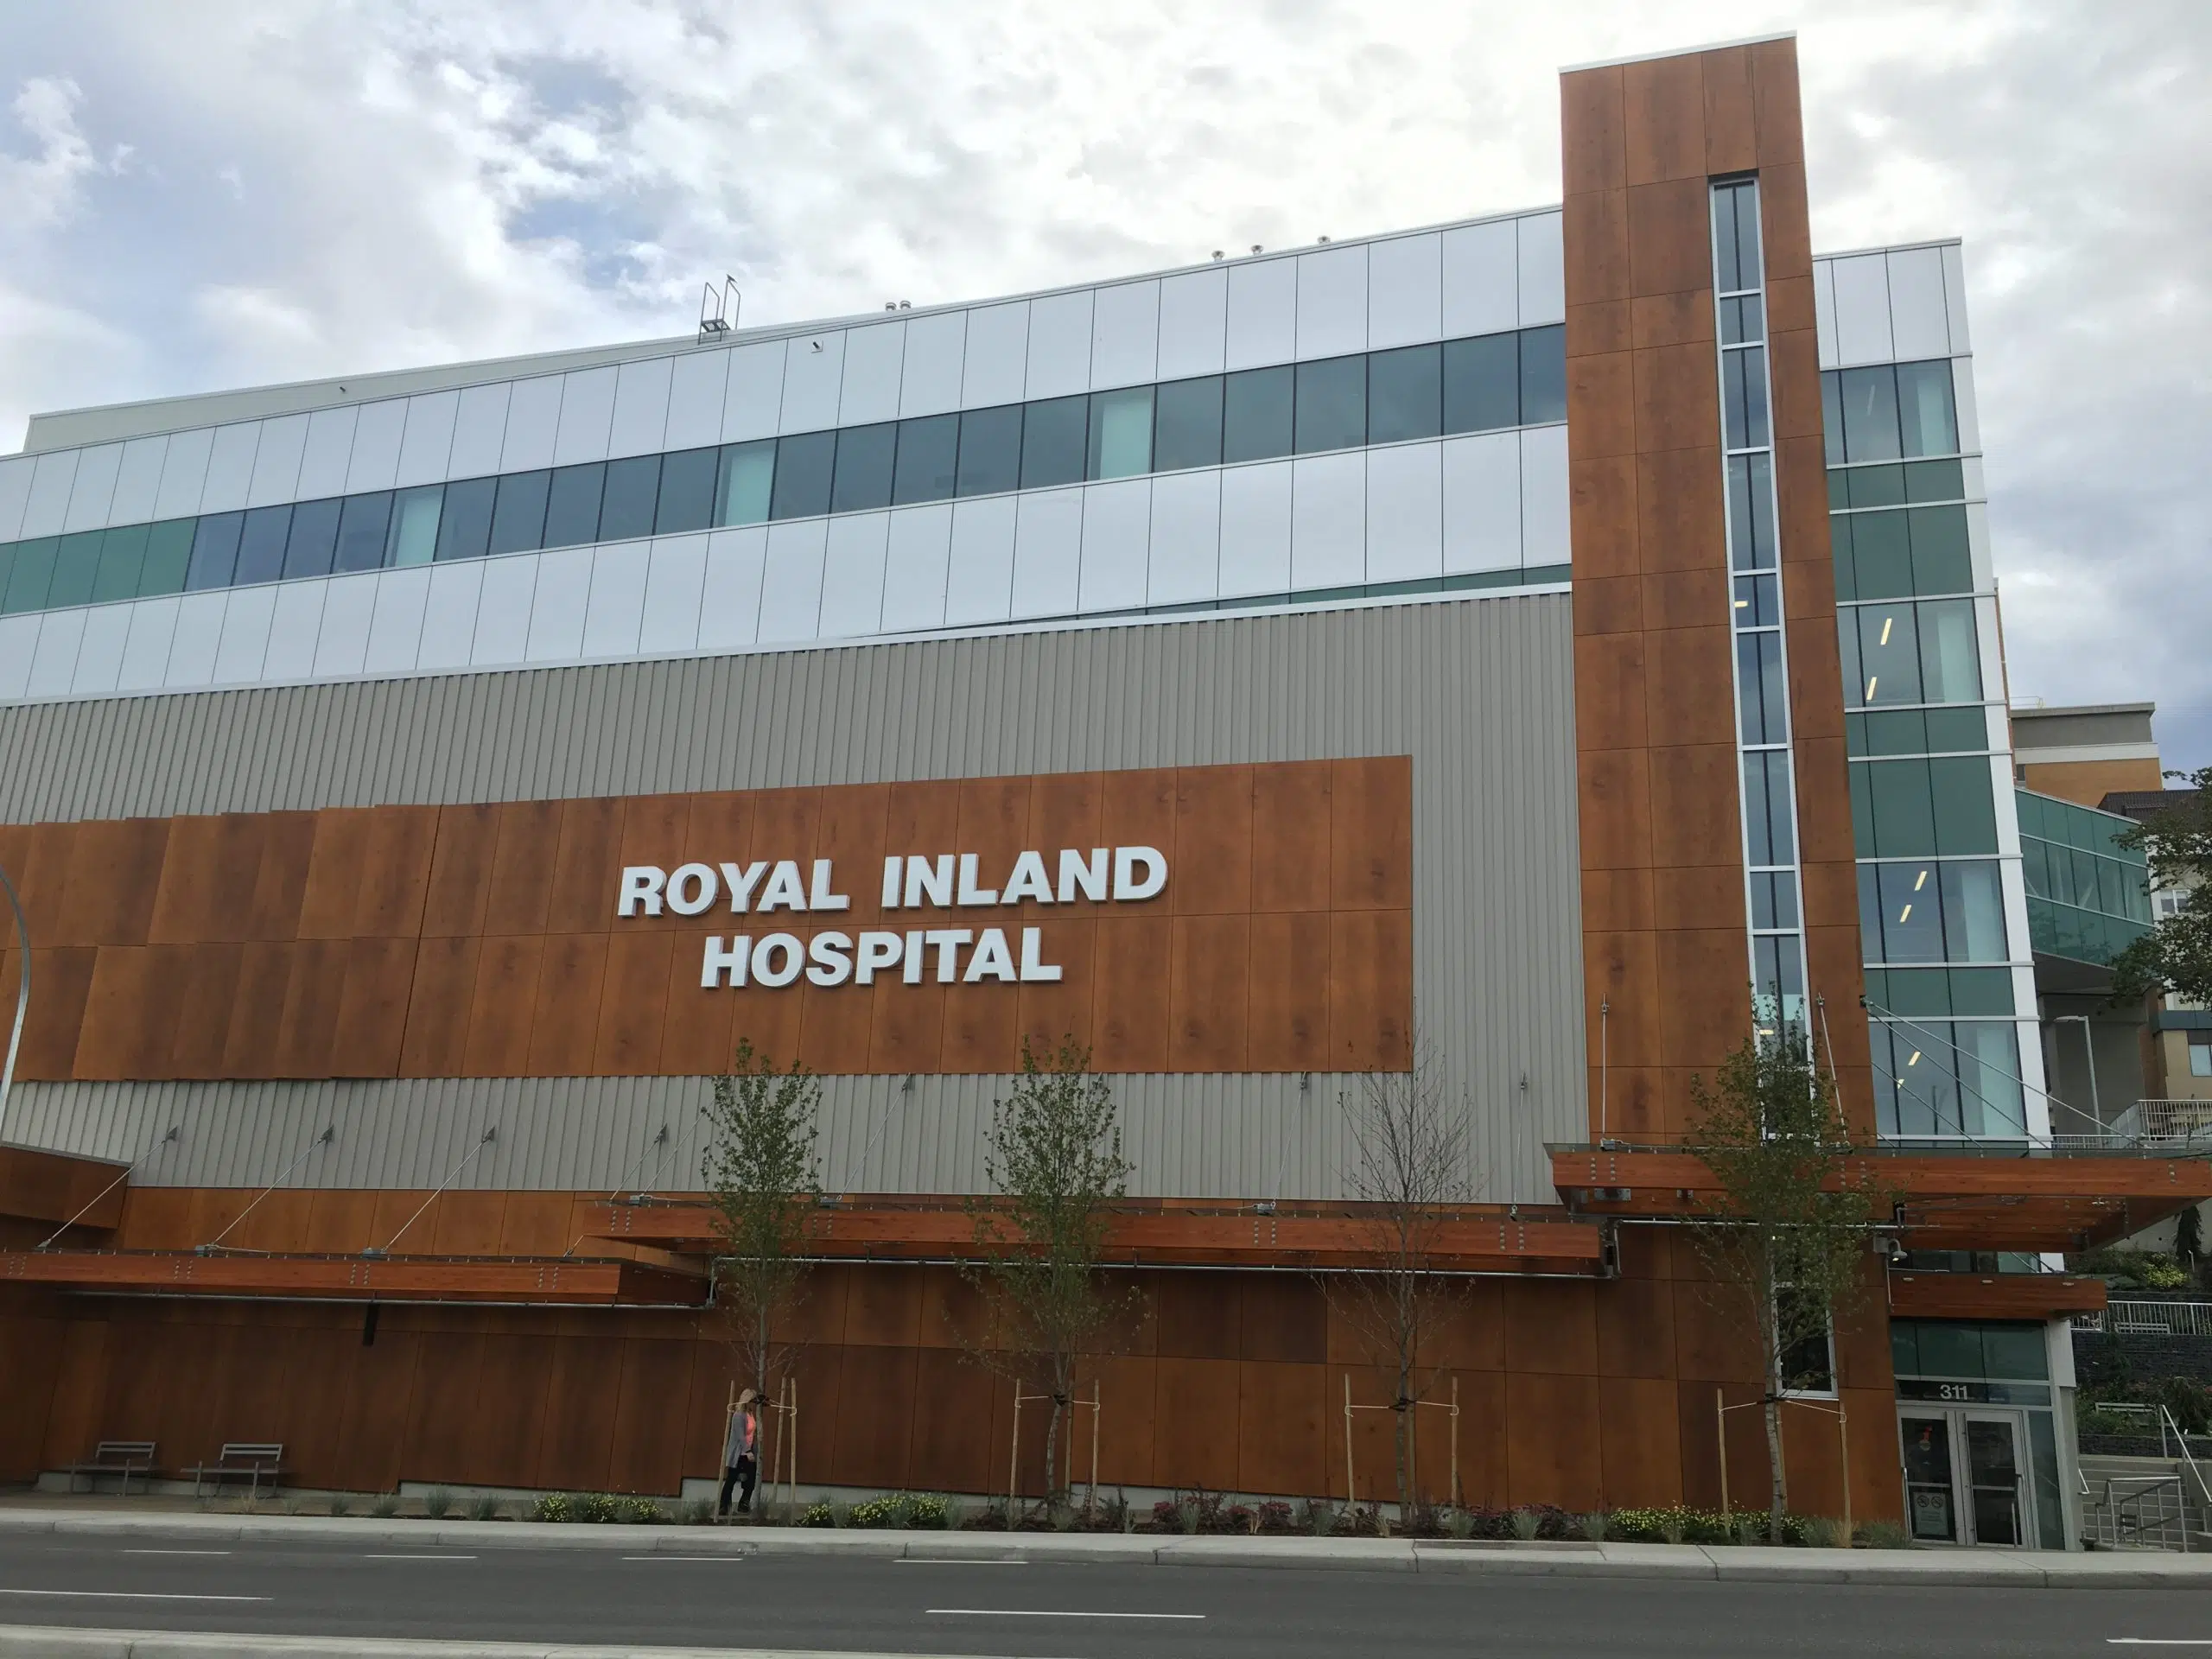 Next major development on the massive upgrade of Royal Inland Hospital coming soon